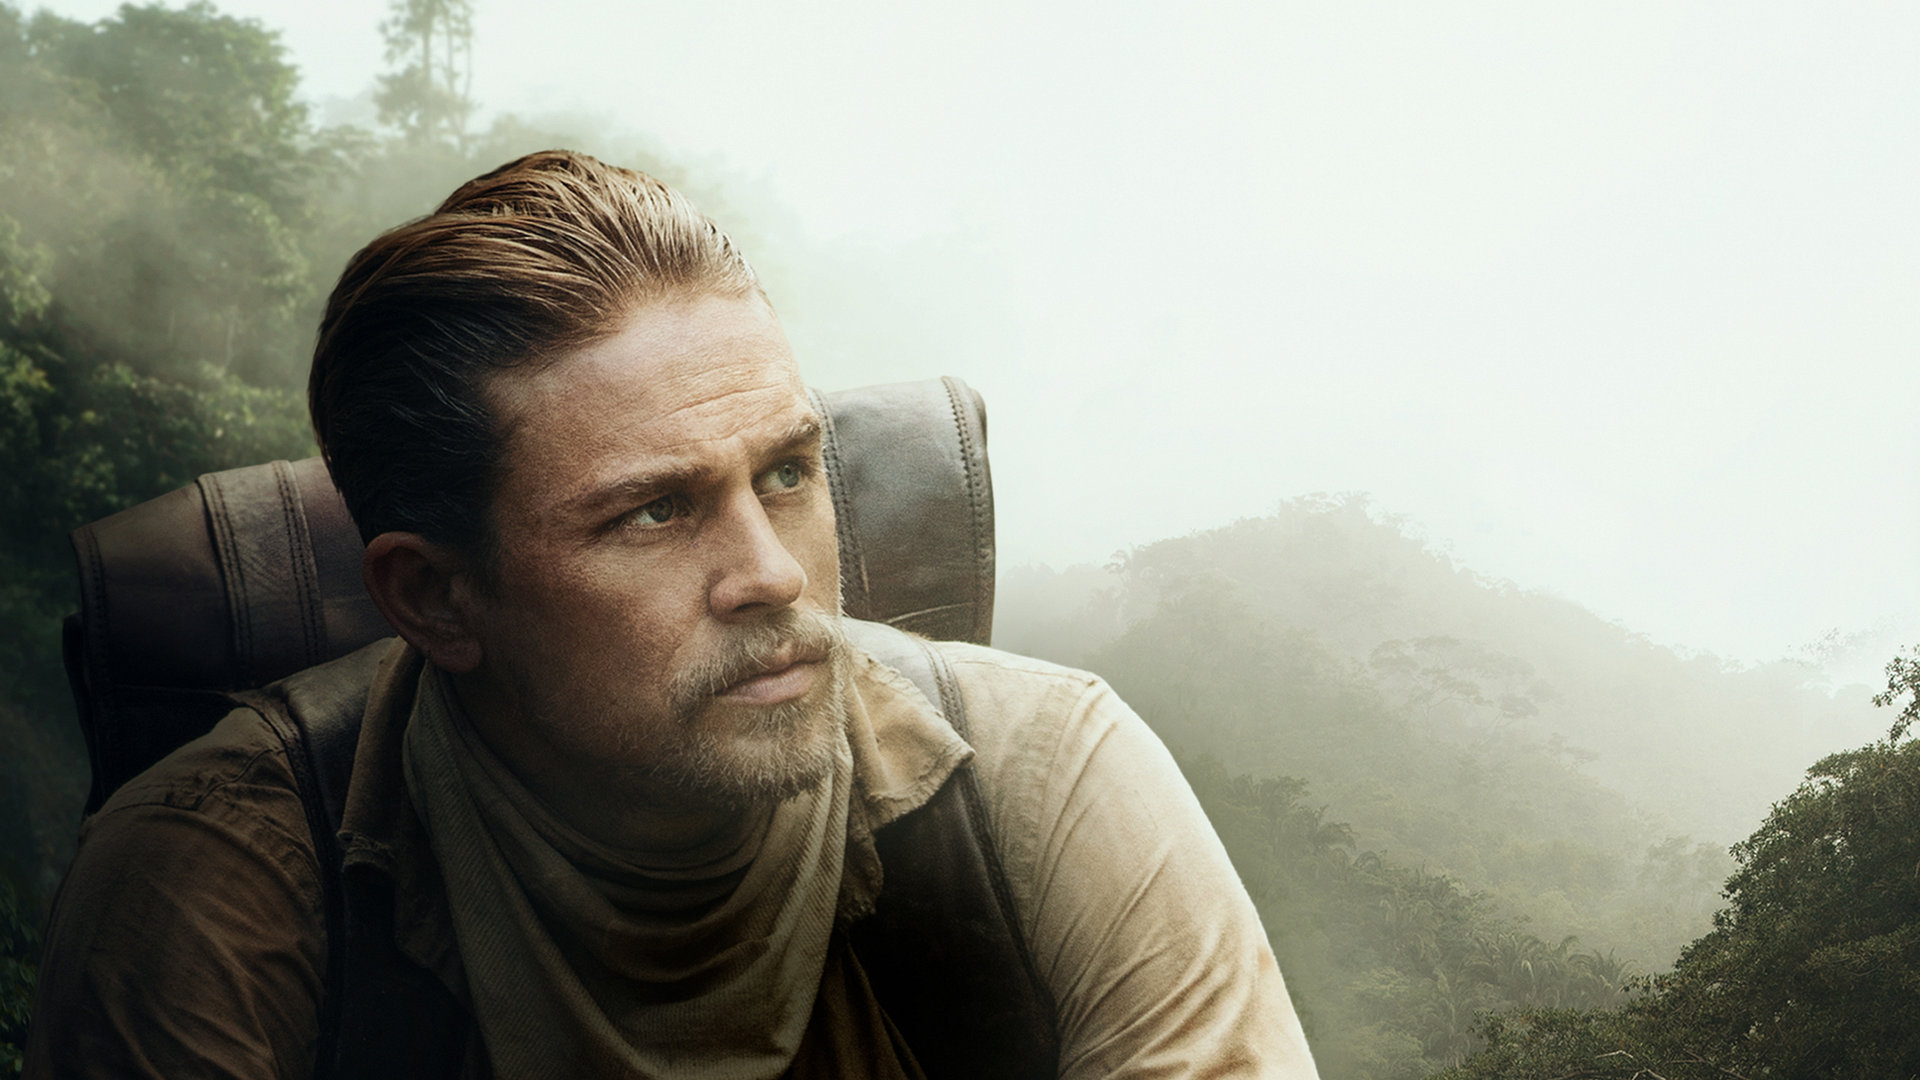 The Lost city of Z